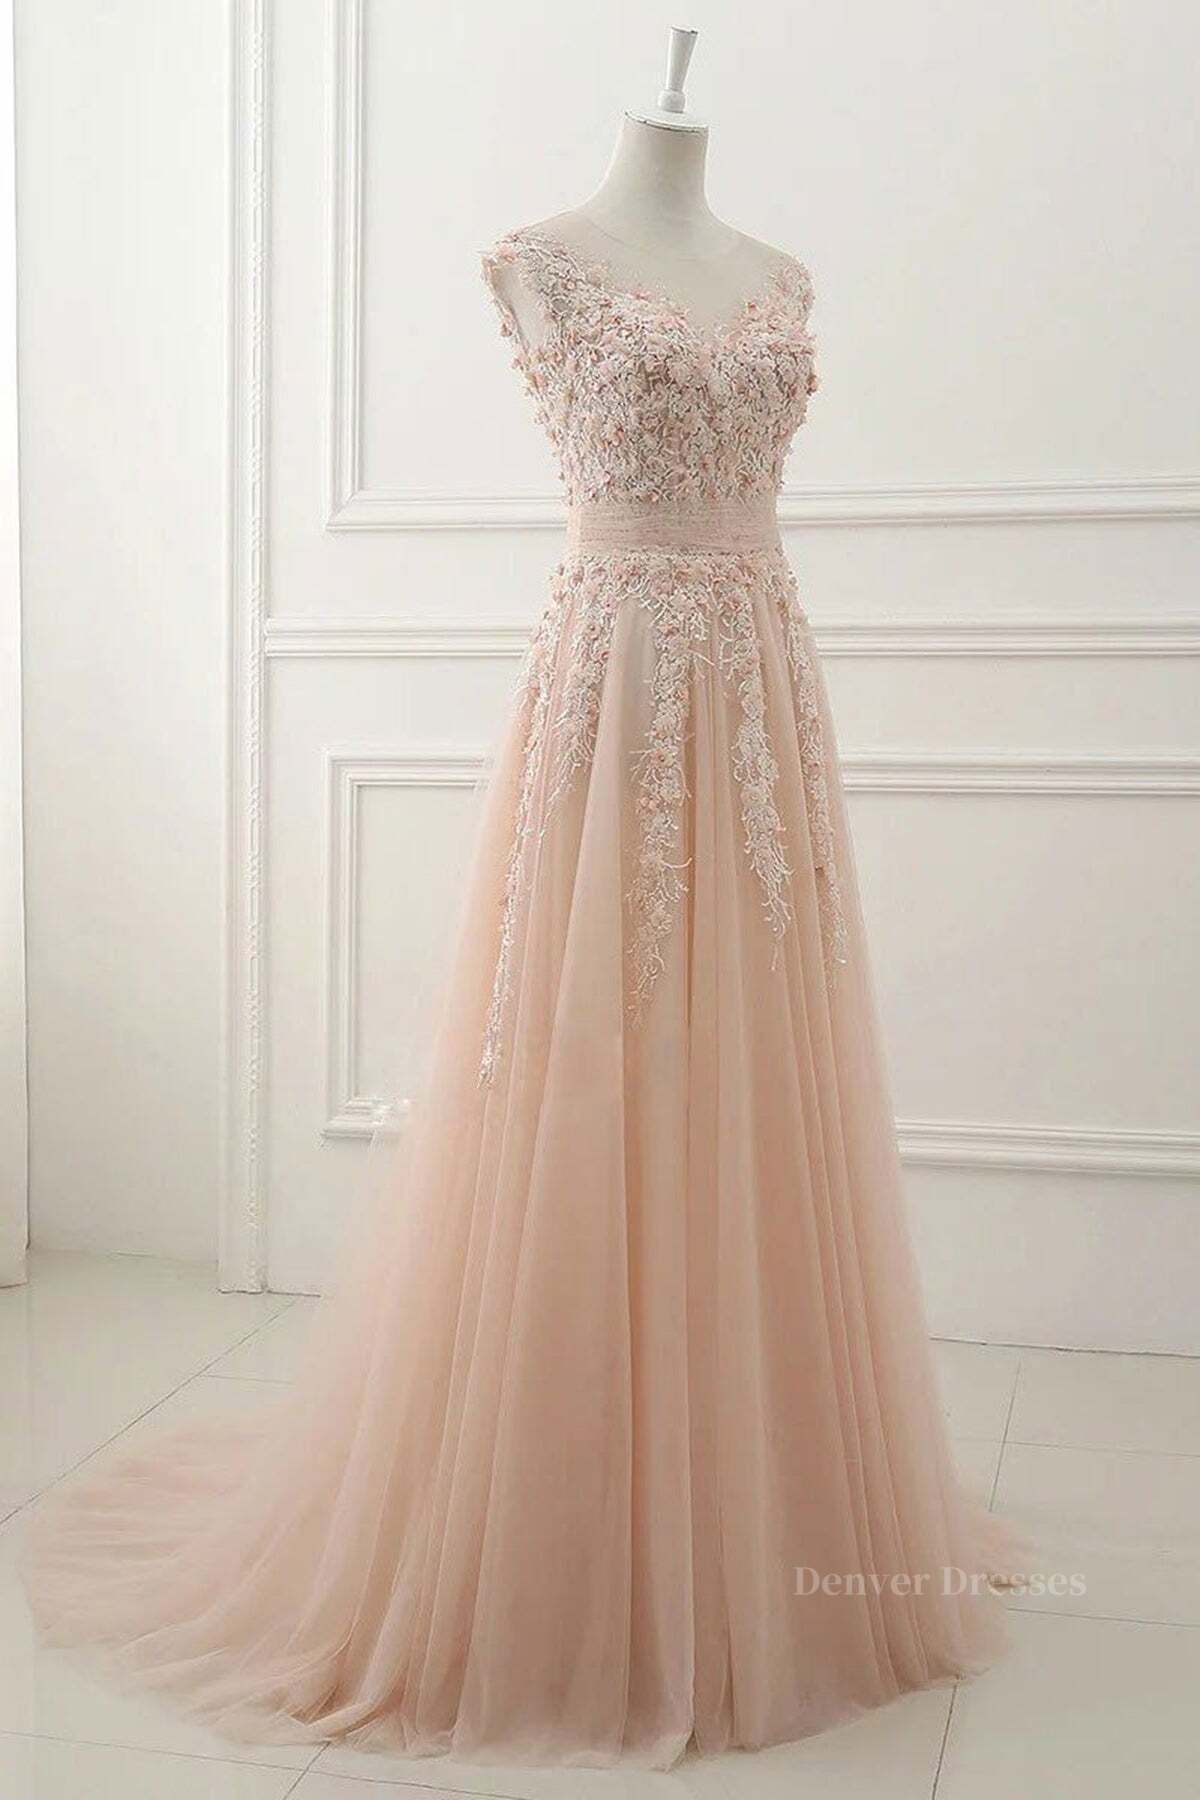 Fairy Dress, Round Neck Pink Lace Prom Dresses, Pink Lace Formal Evening Dresses